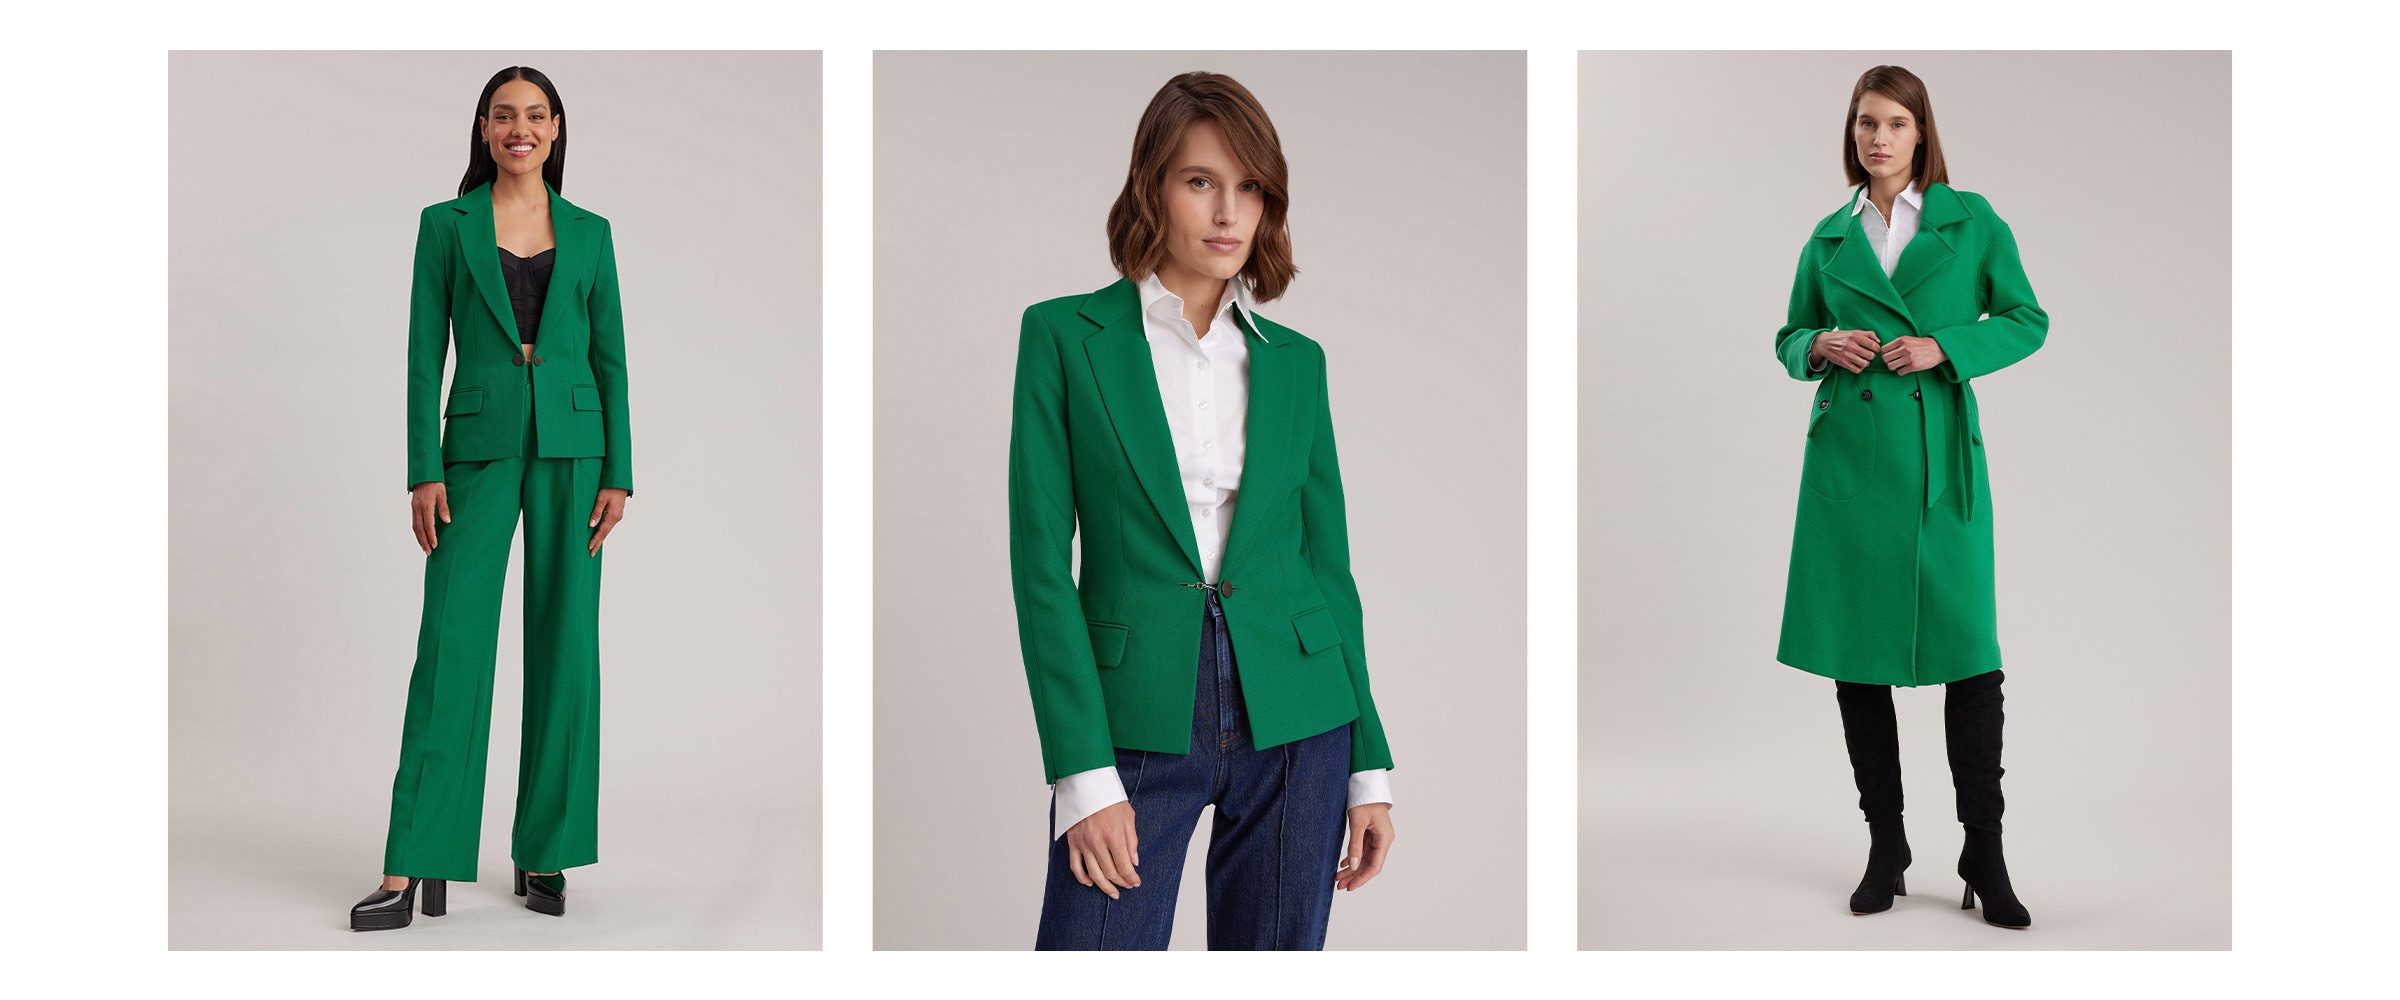 The new Pre-Fall 2023 Collection from Anne Fontaine features vibrant green colorways that illuminate the designer's affinity for the wild, untamed beauty of nature. Green represents an endless array of tonalities and hues, from lush forests to sun-soaked 